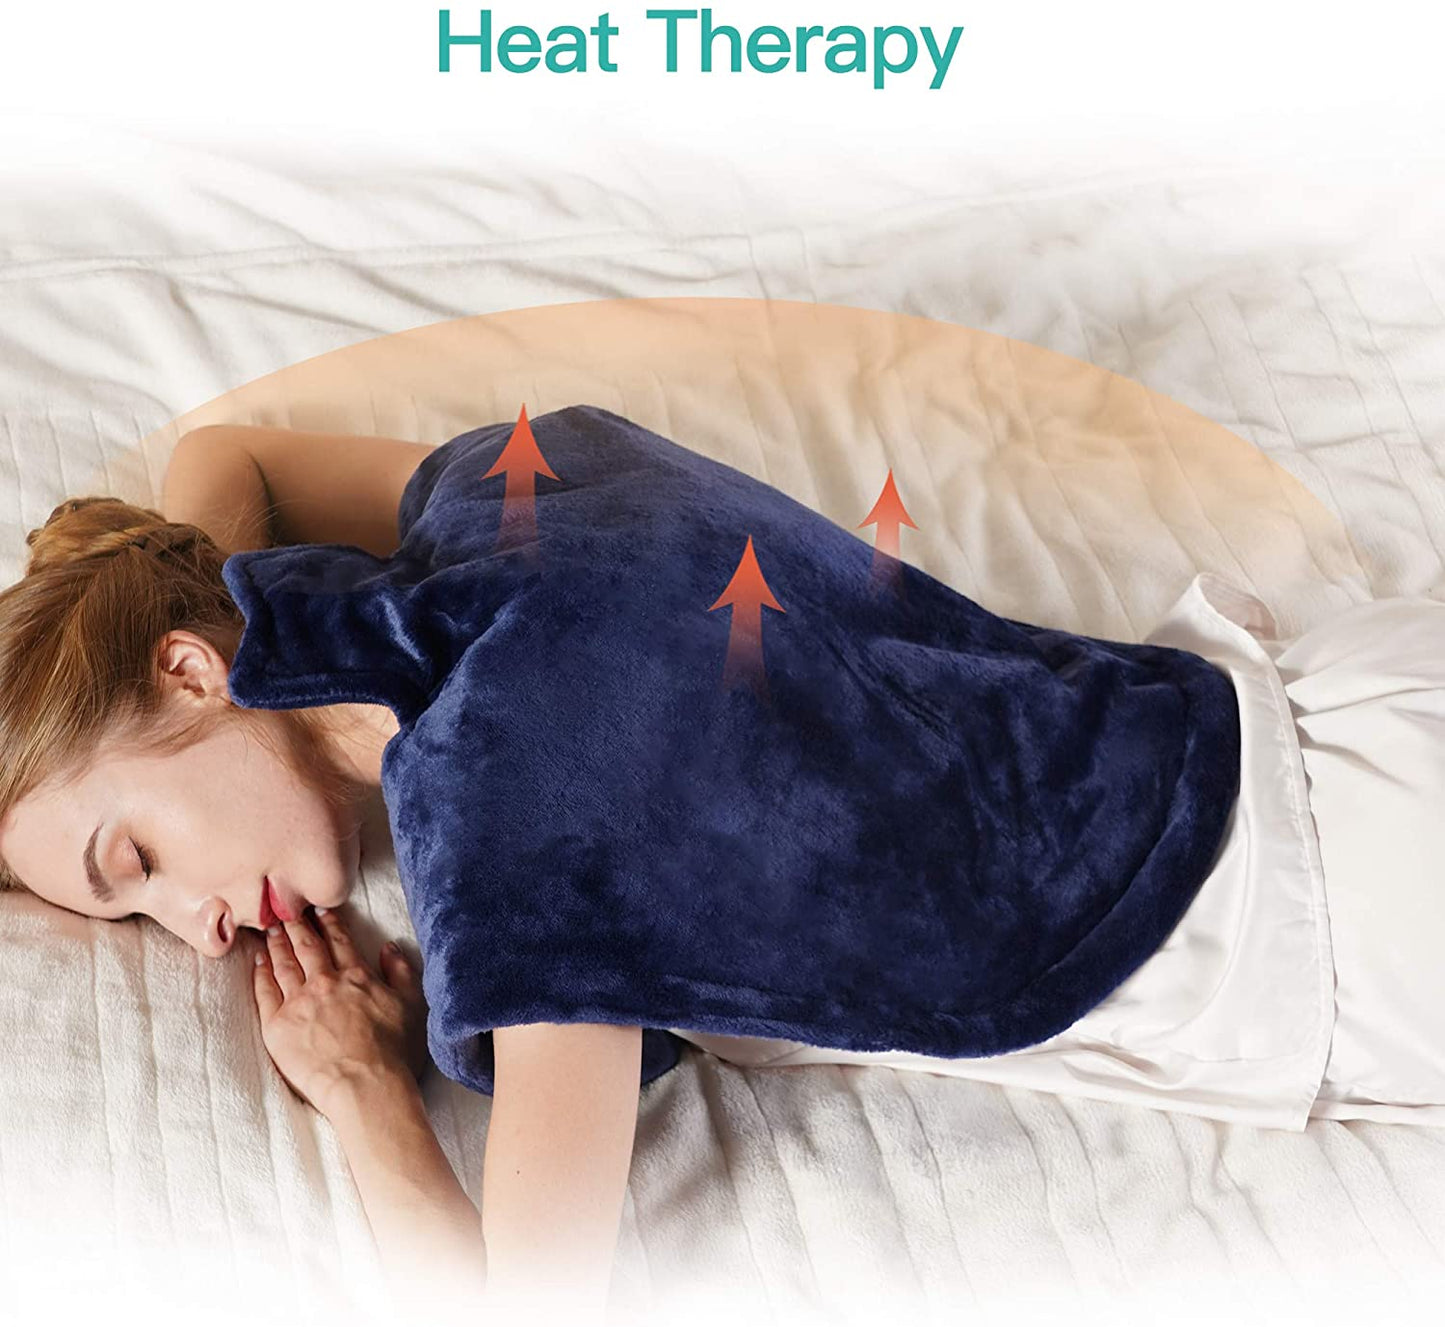 Large Heating Pad for Back and Shoulder